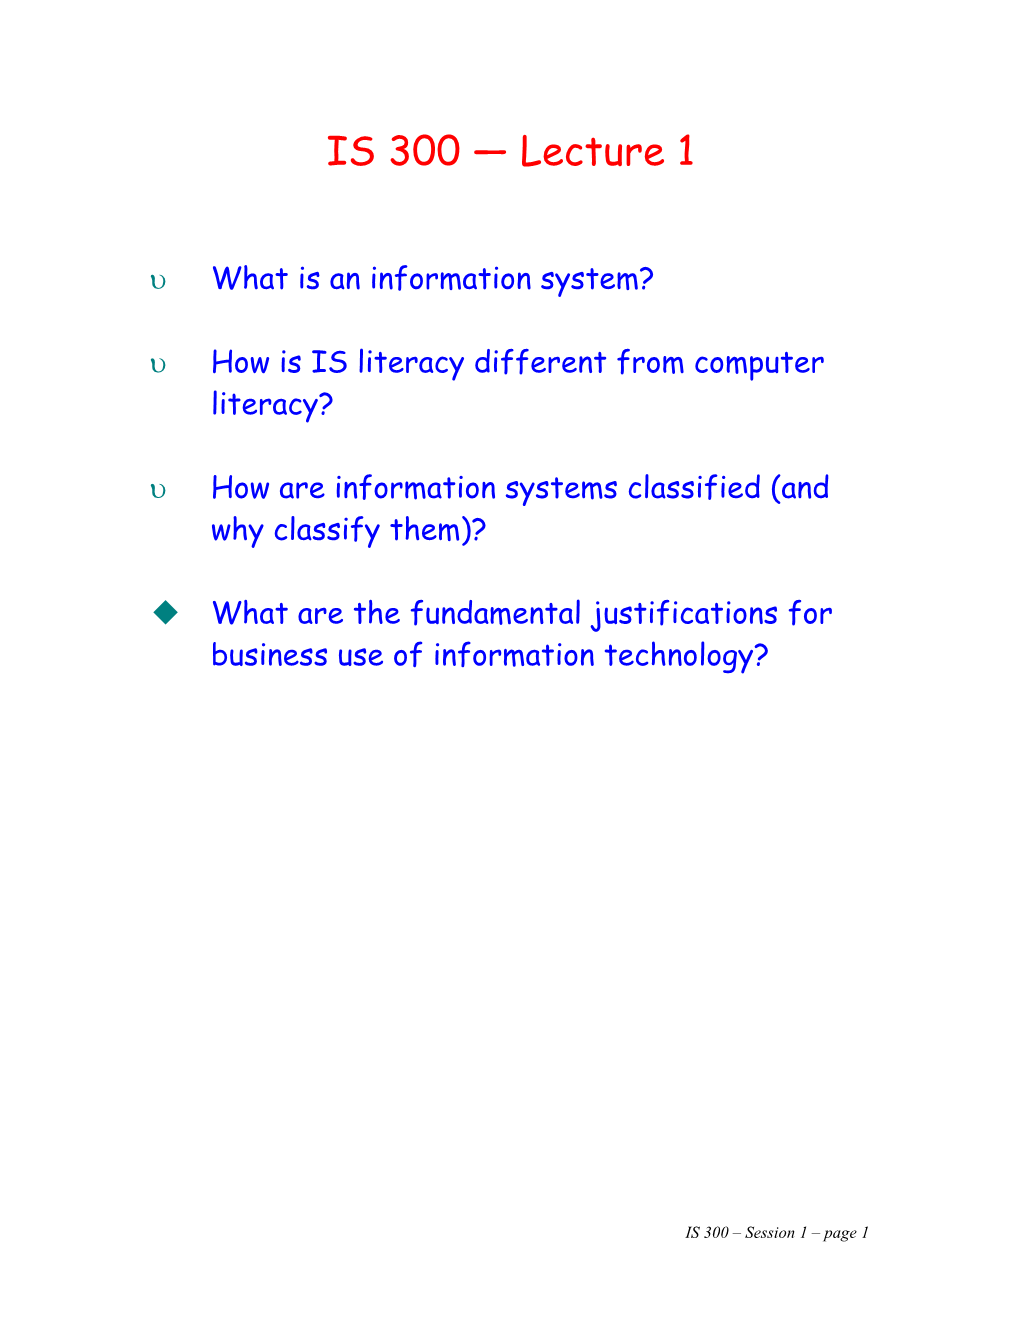 U How Is IS Literacy Different from Computer Literacy?